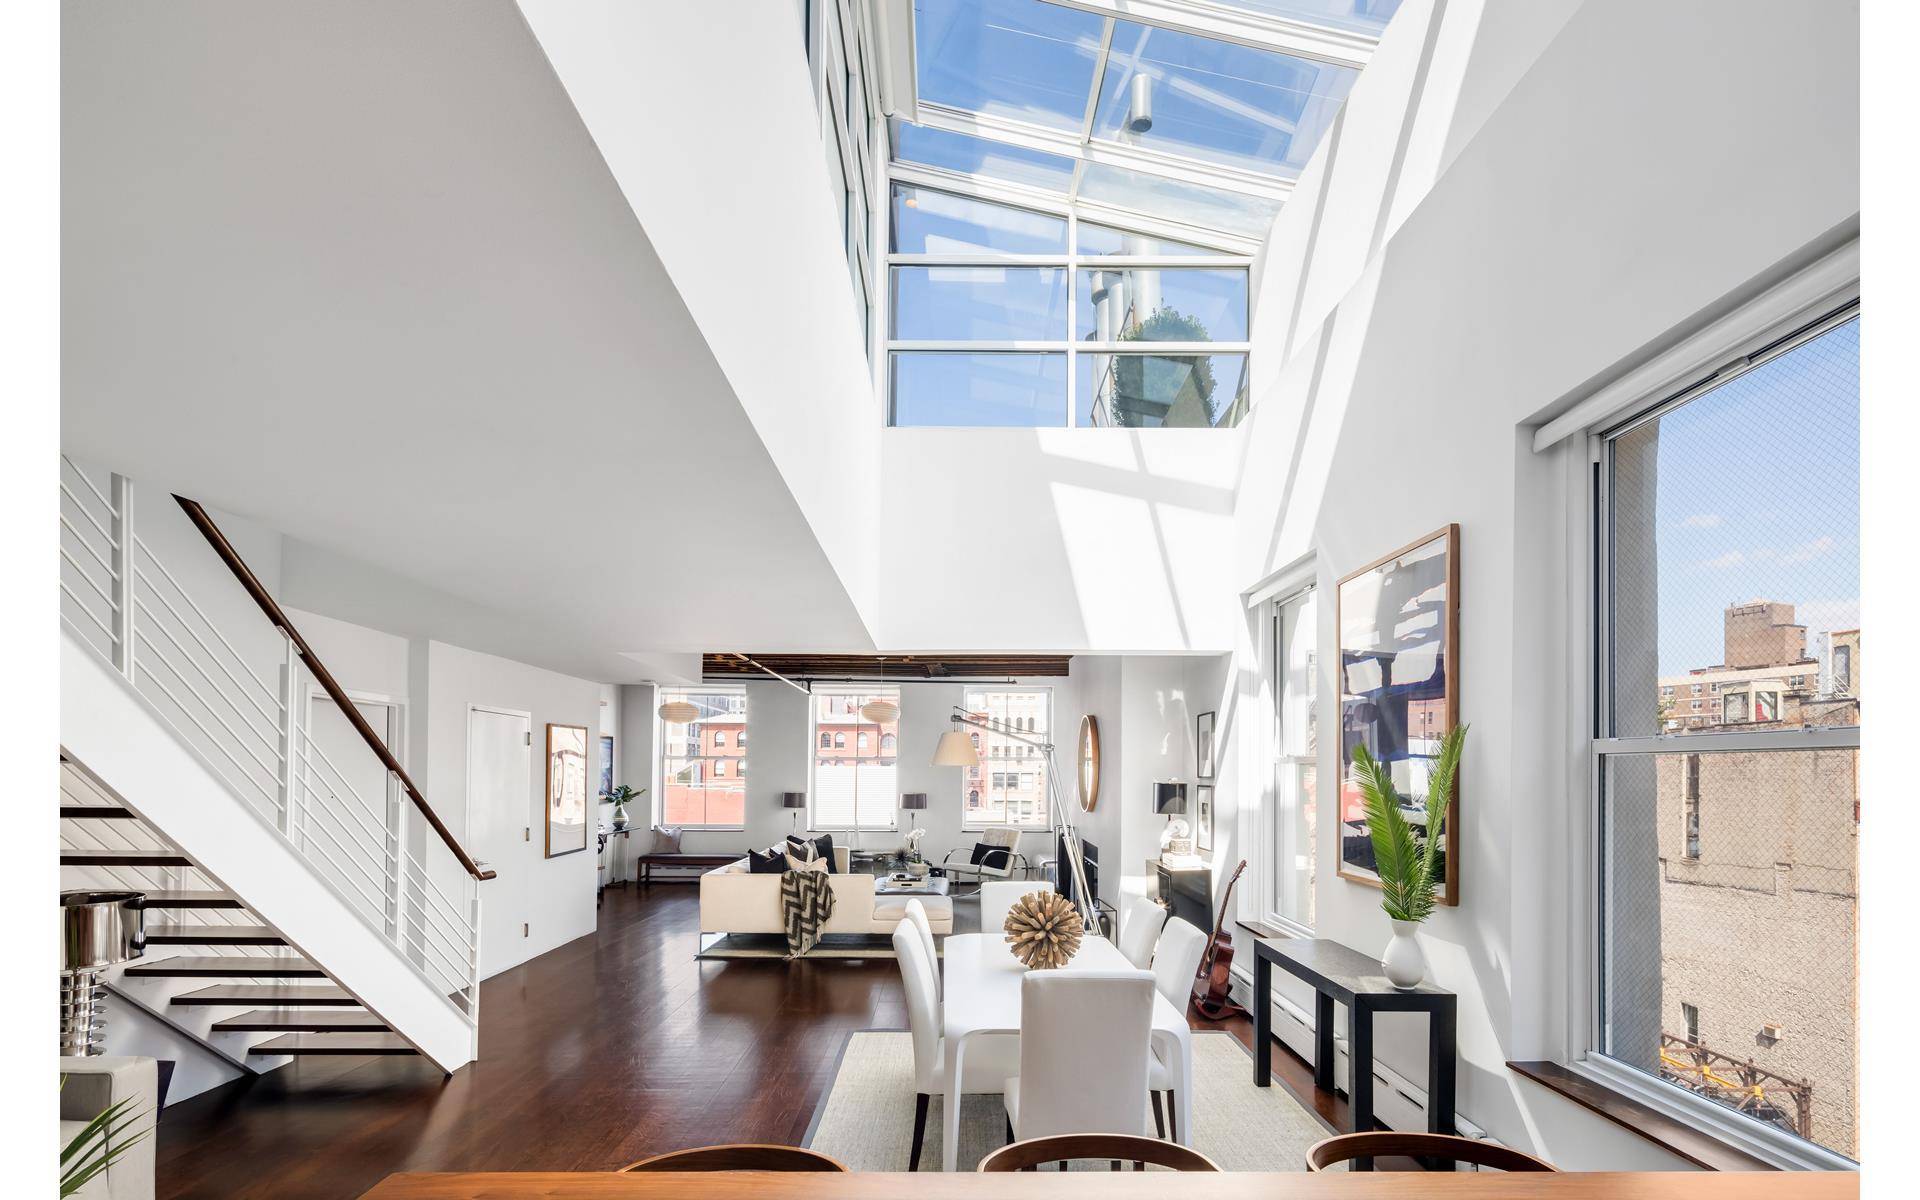 One of a kind Duplex Penthouse on coveted Great Jones St.